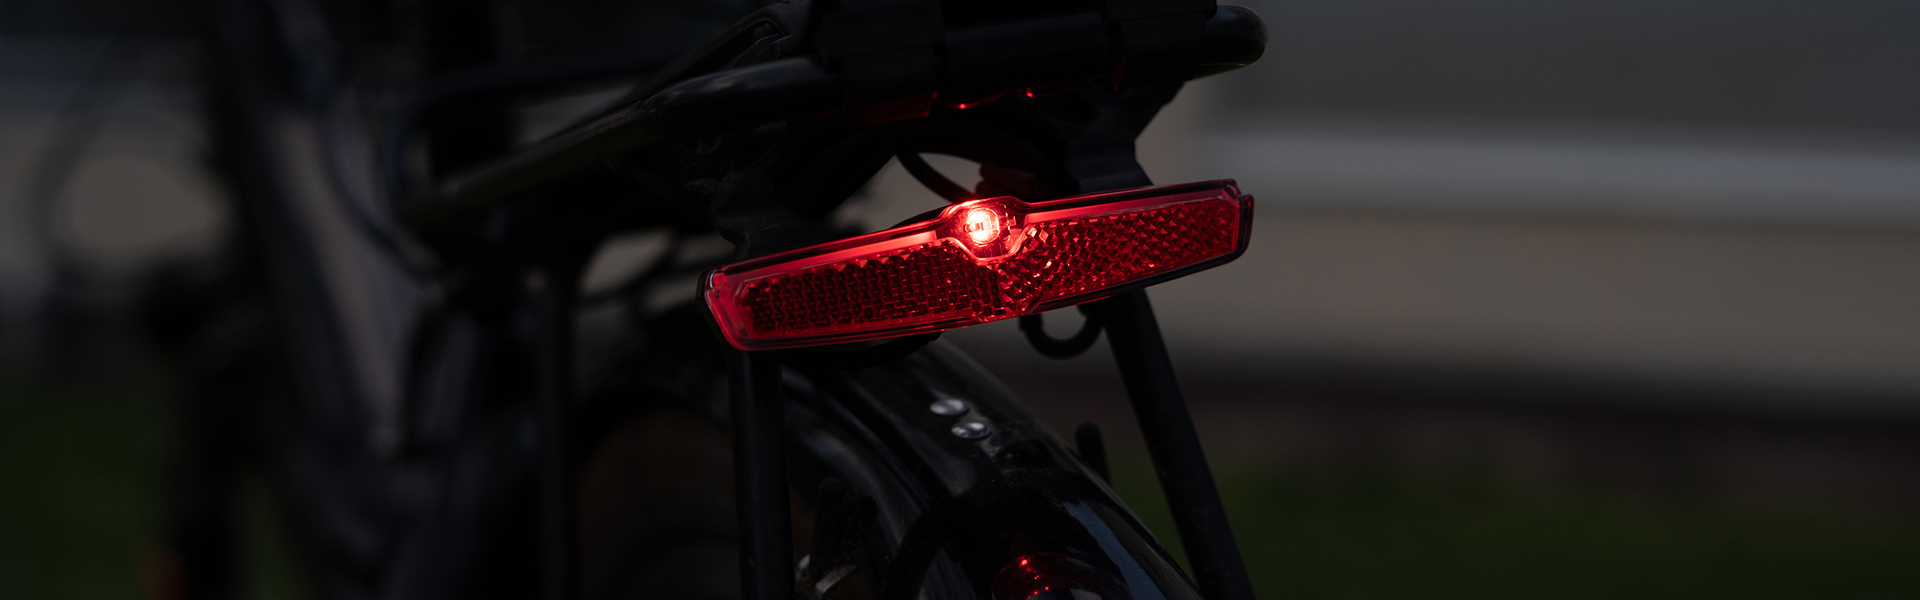 Sate-lite CREE ebike light ISO 6721-1 StVZO ECE R50 eletric bike rear light with  ISO 6721-2 StVZO Z reflector  mount on Carrier 6-48V